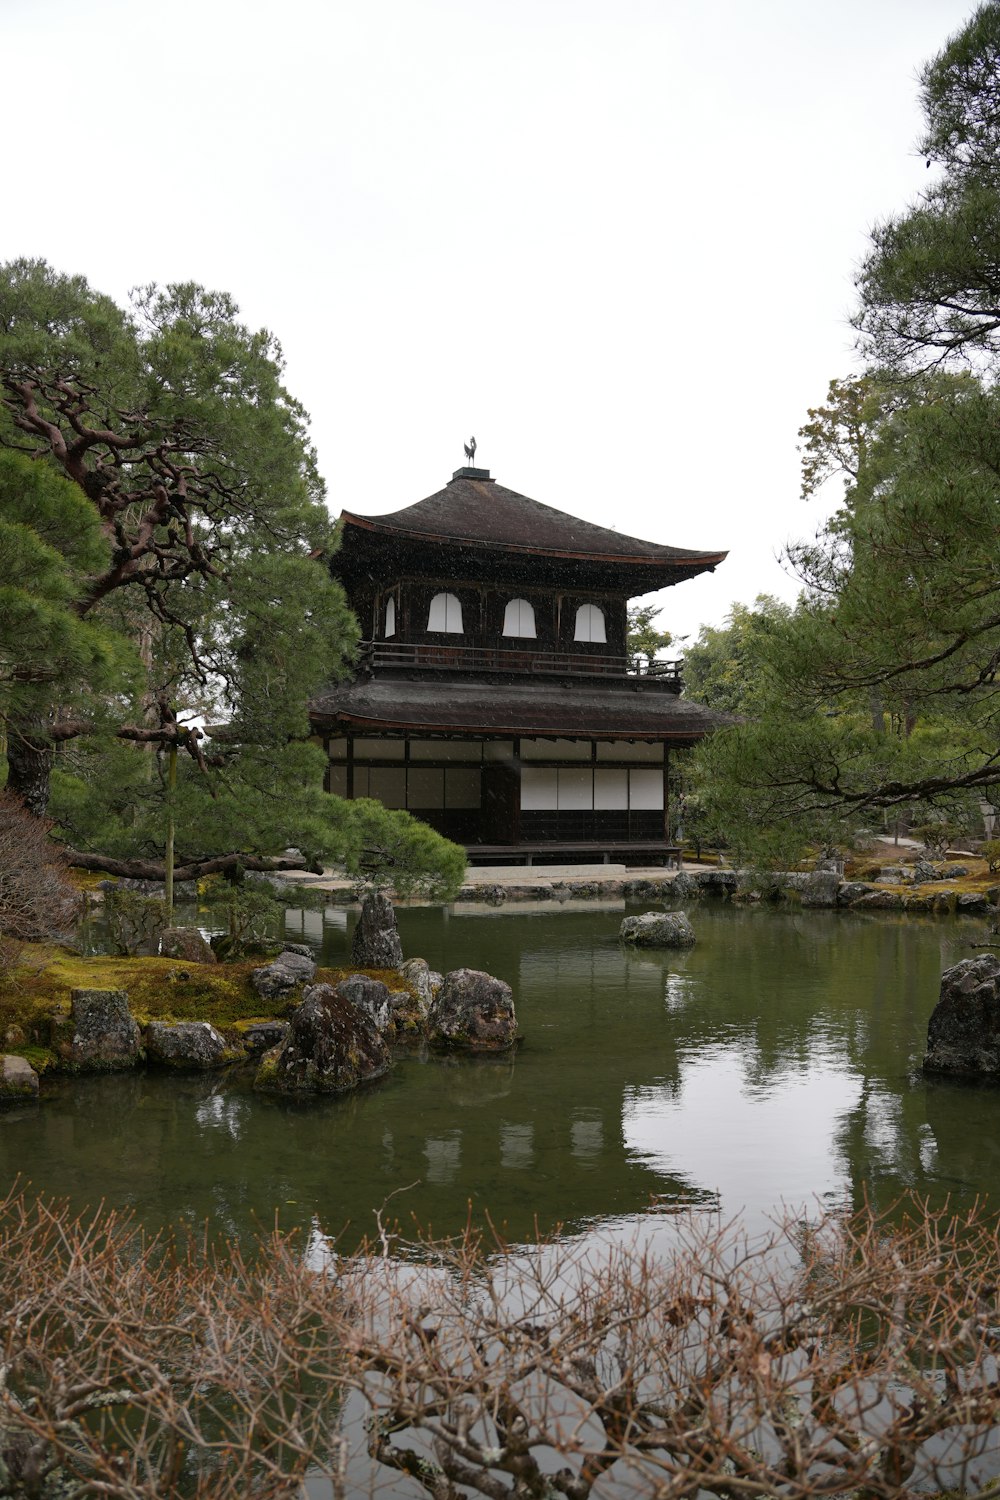 a pagoda in the middle of a pond surrounded by trees